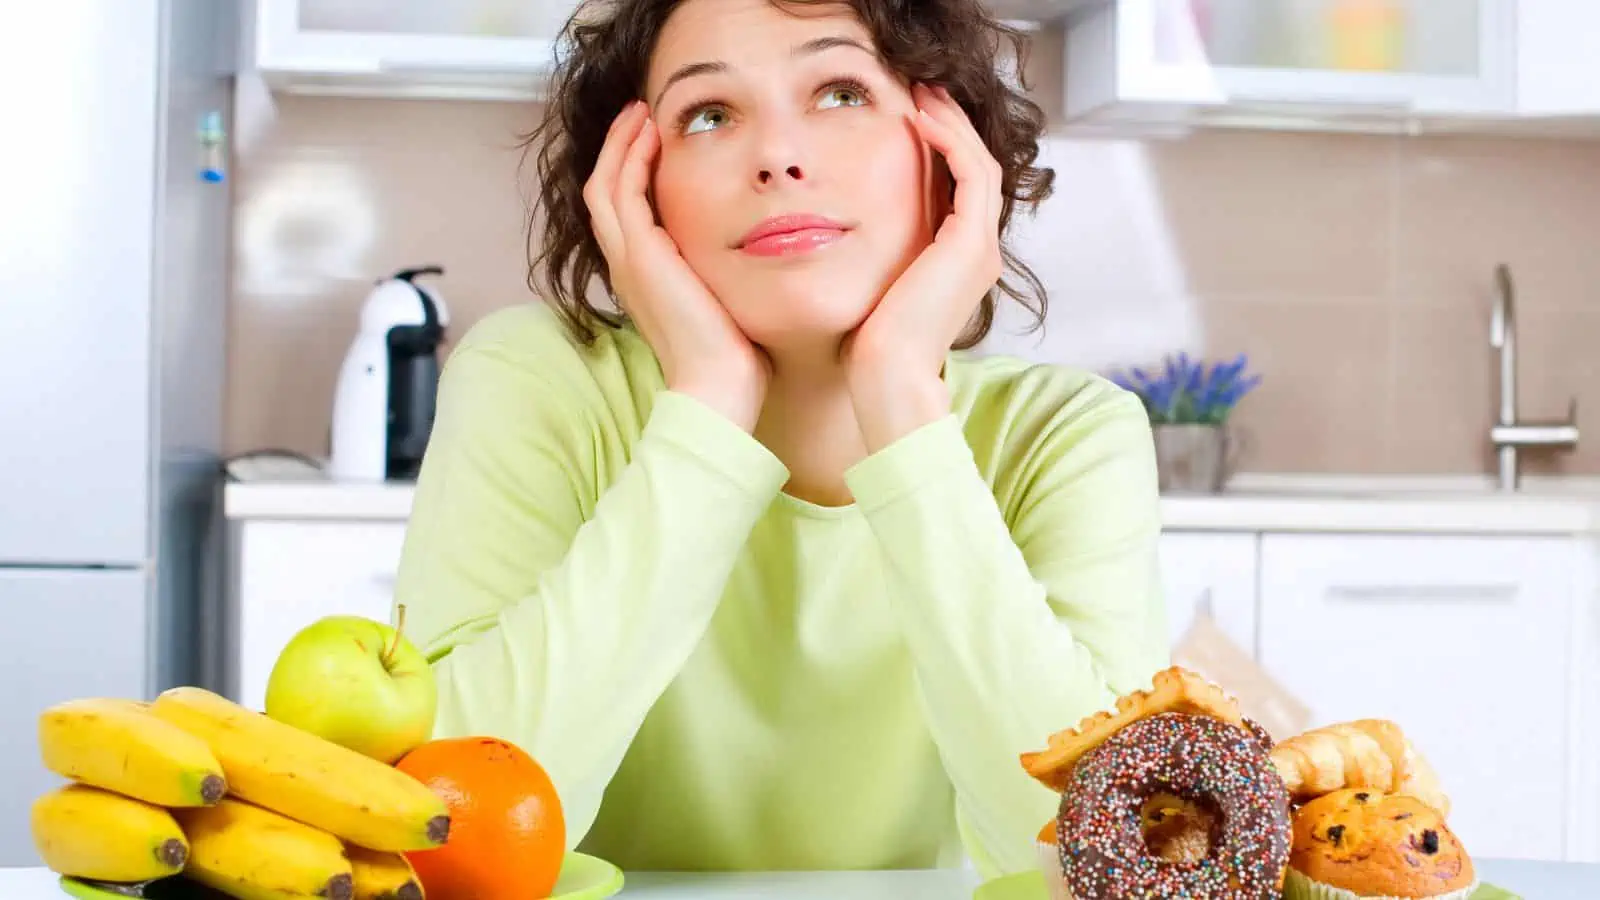 woman choosing between plate of fruit and plate of donuts and muffins